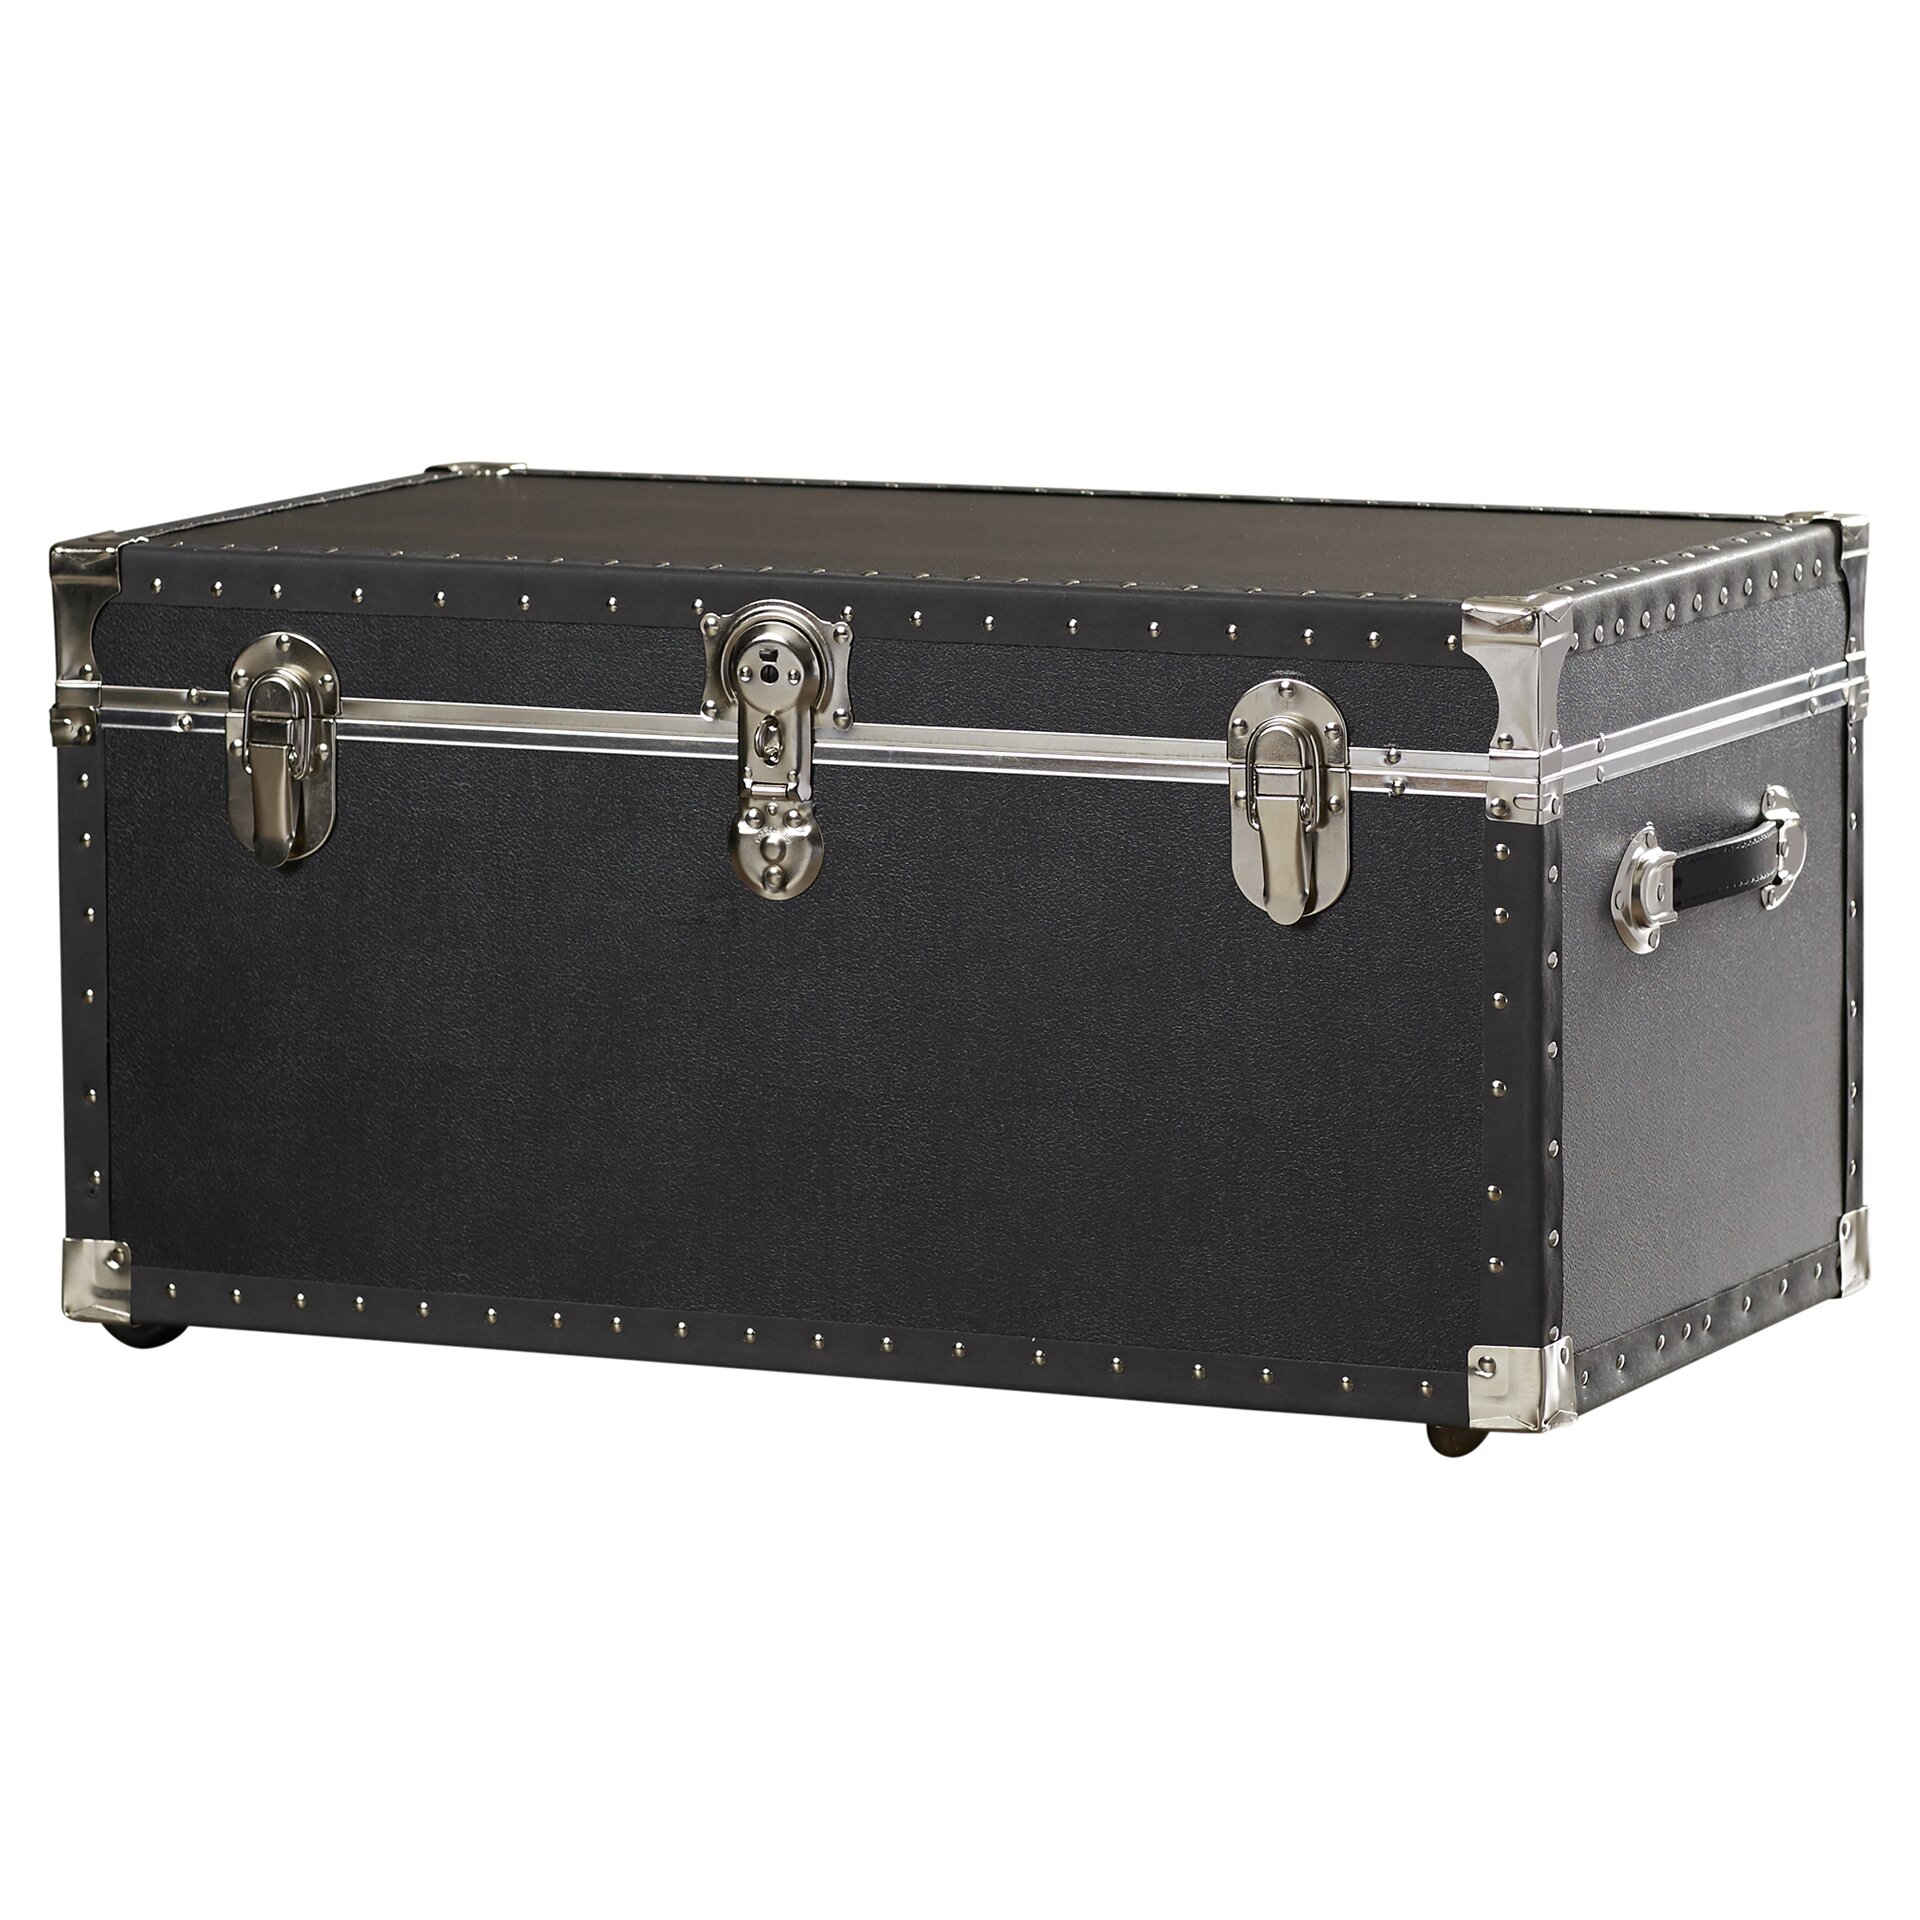 Symple Stuff Oversize Trunk with Wheels in Black & Reviews | Wayfair